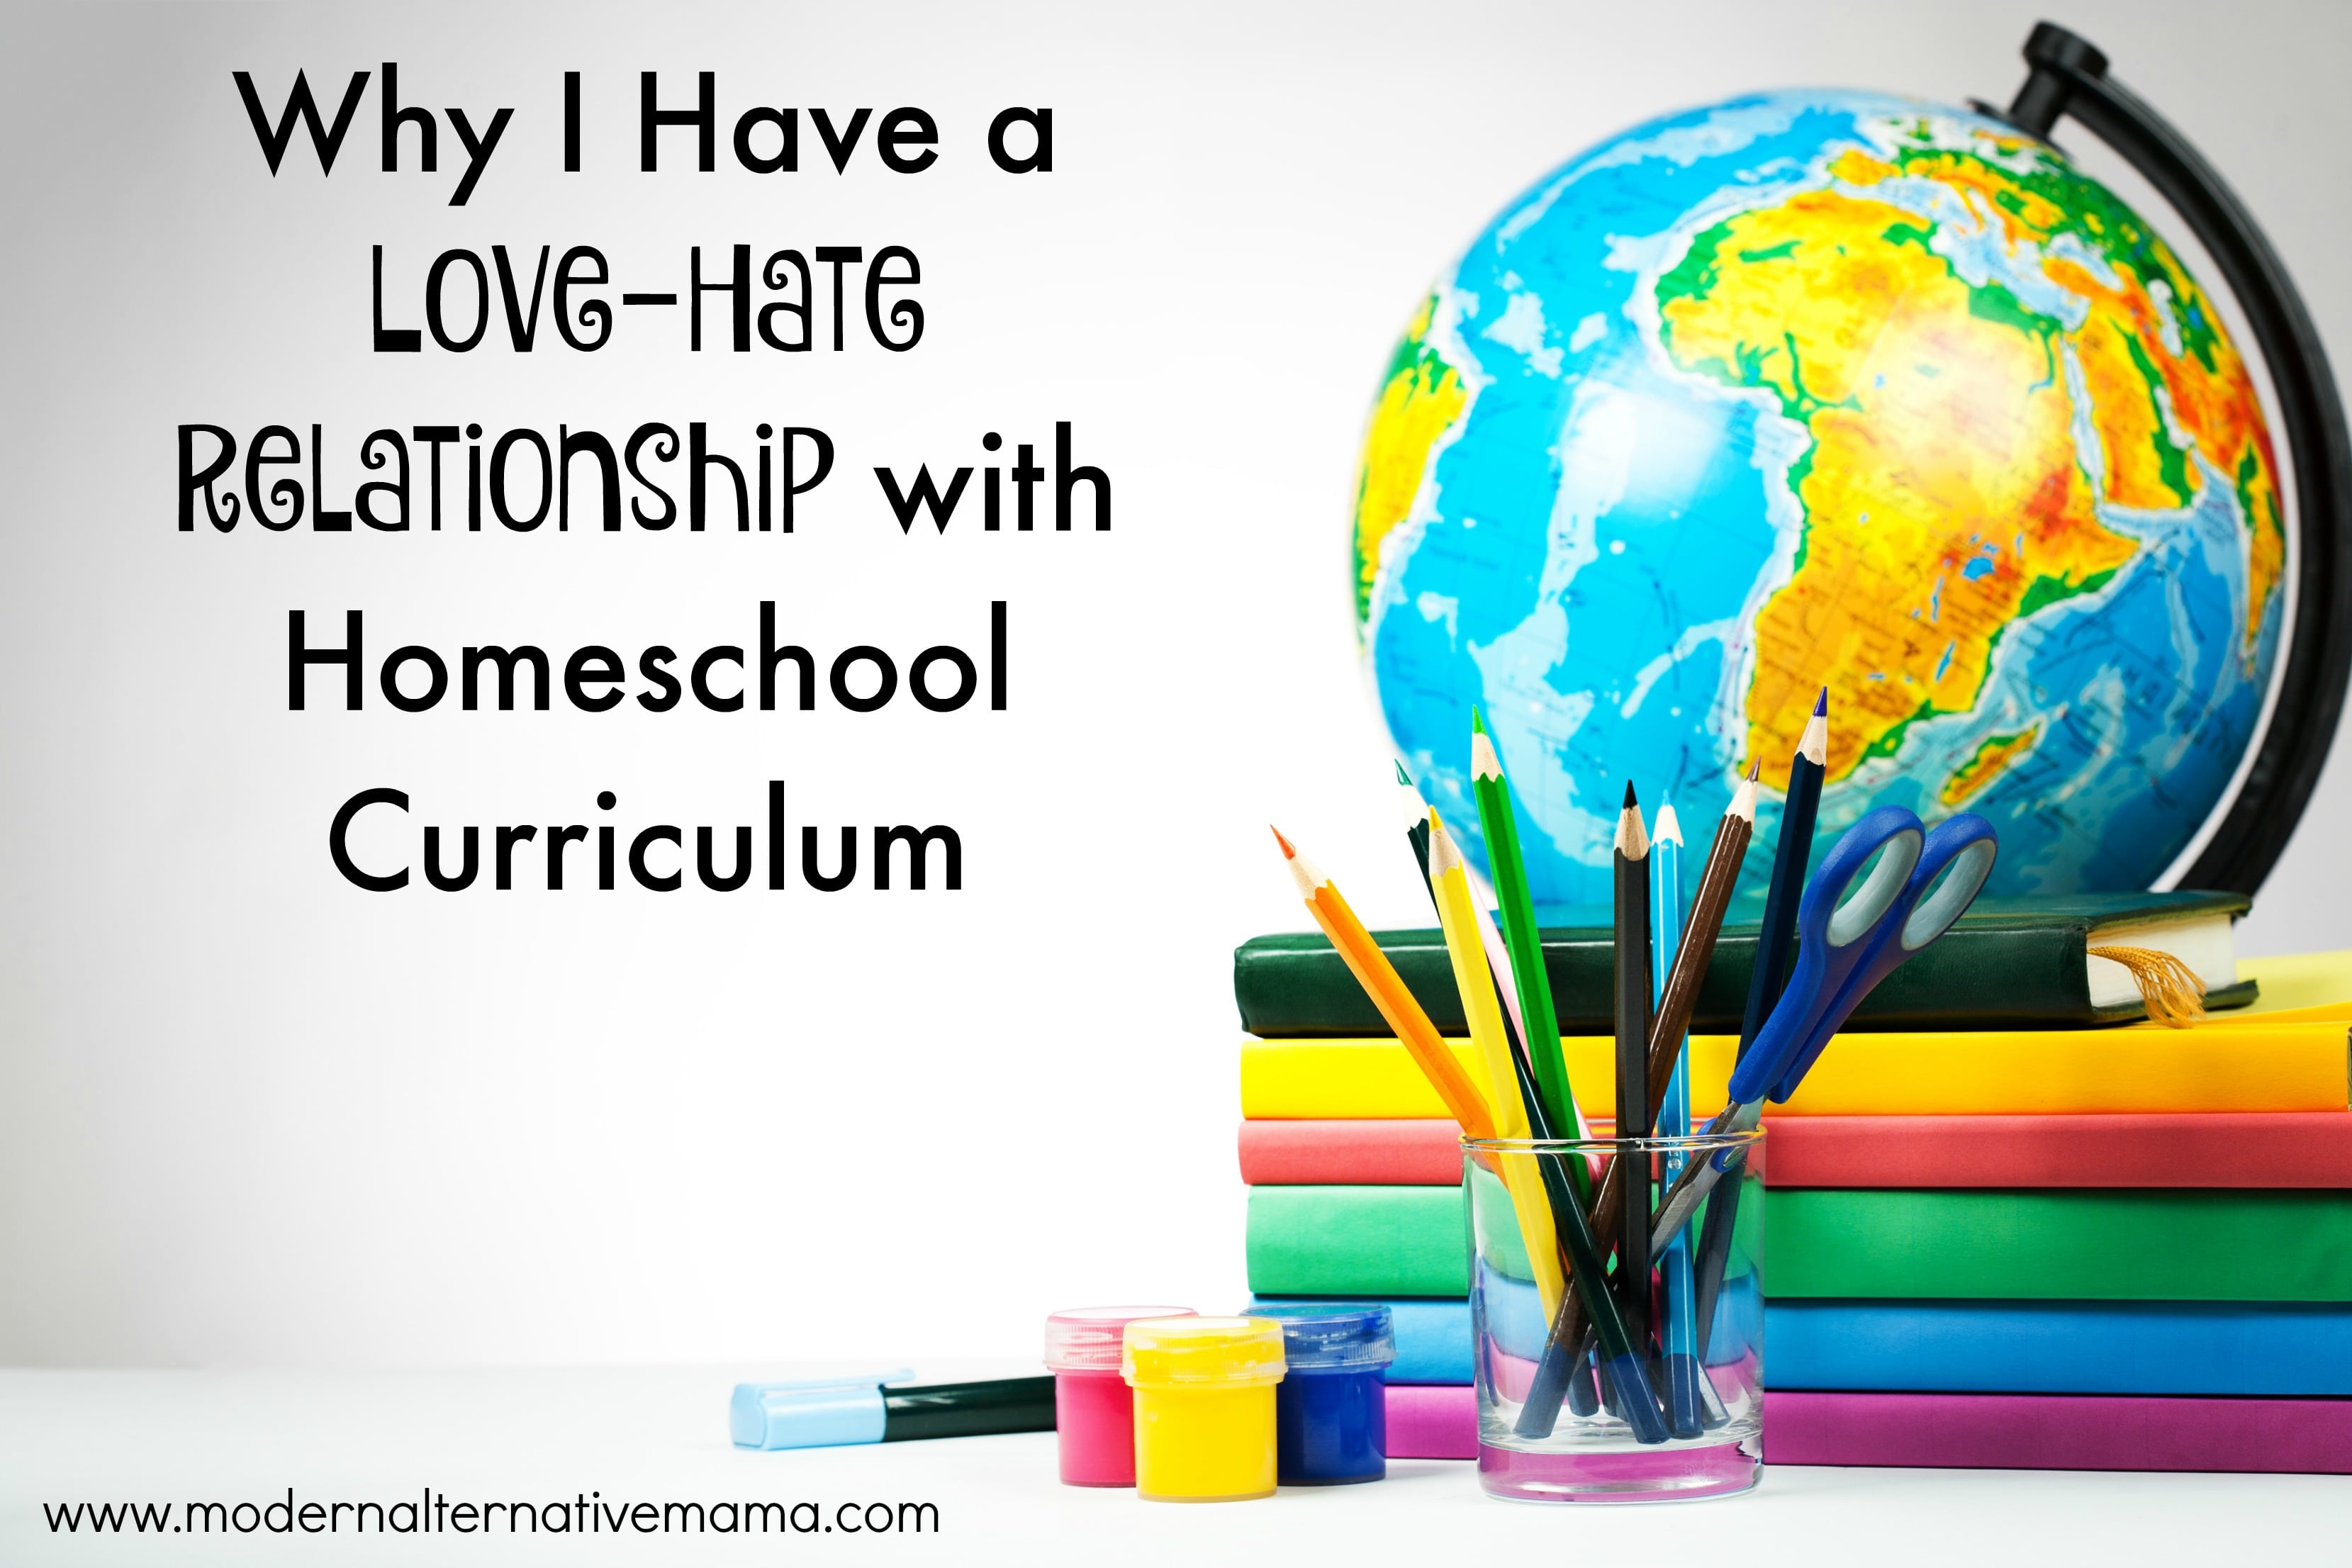 Why I Have a Love-Hate Relationship with Homeschool Curriculum